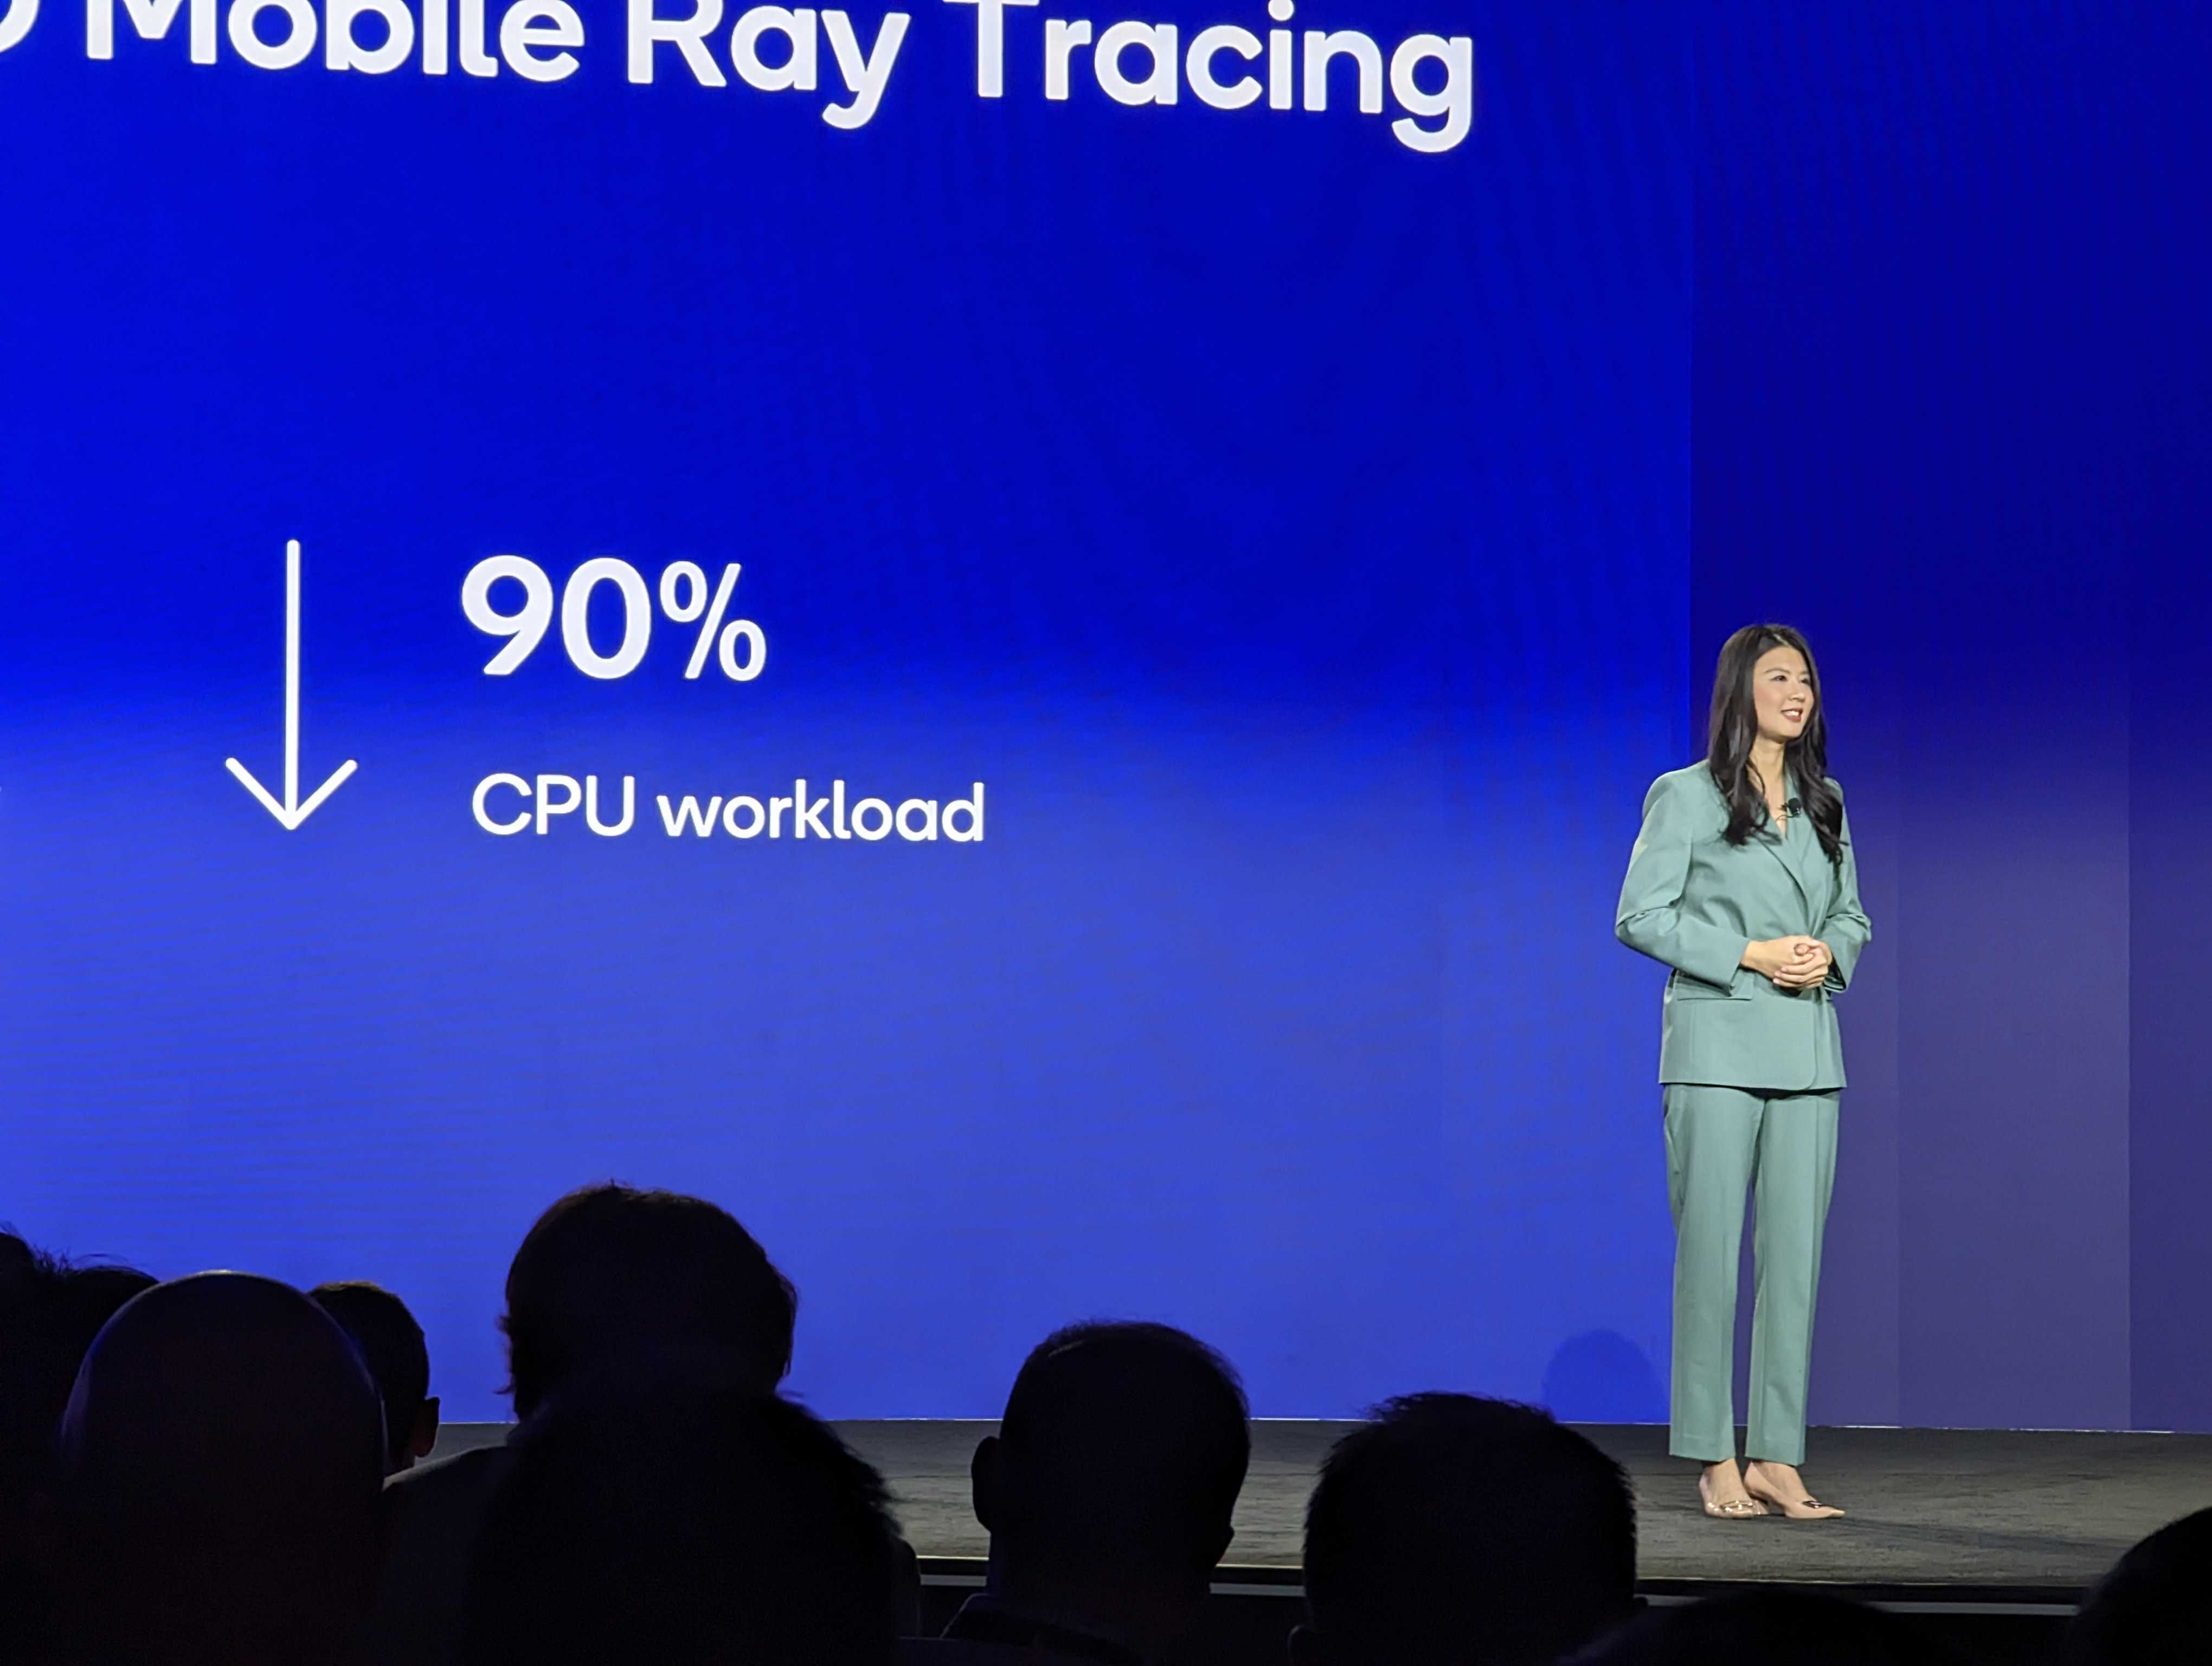 Oppo's Jane Tian on stage at the Qualcomm Snapdragon Summit 2022 up close